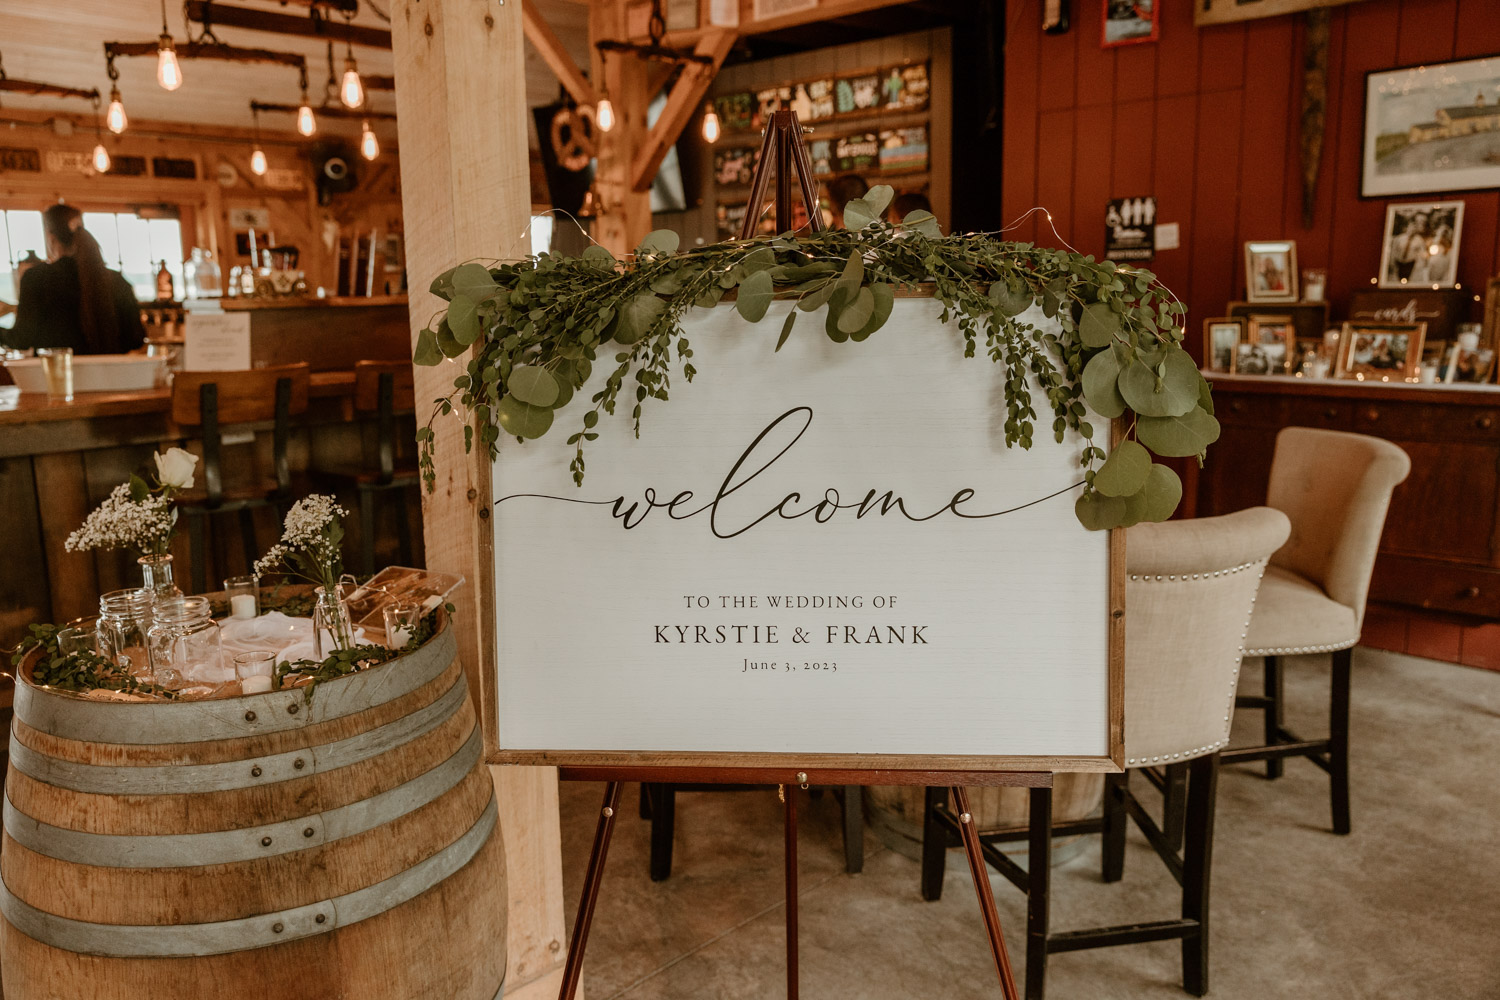 Chic wedding welcome sign adorned with fresh eucalyptus, inviting guests to the union of Kyrstie & Frank at Locust Grove Brewing Company.